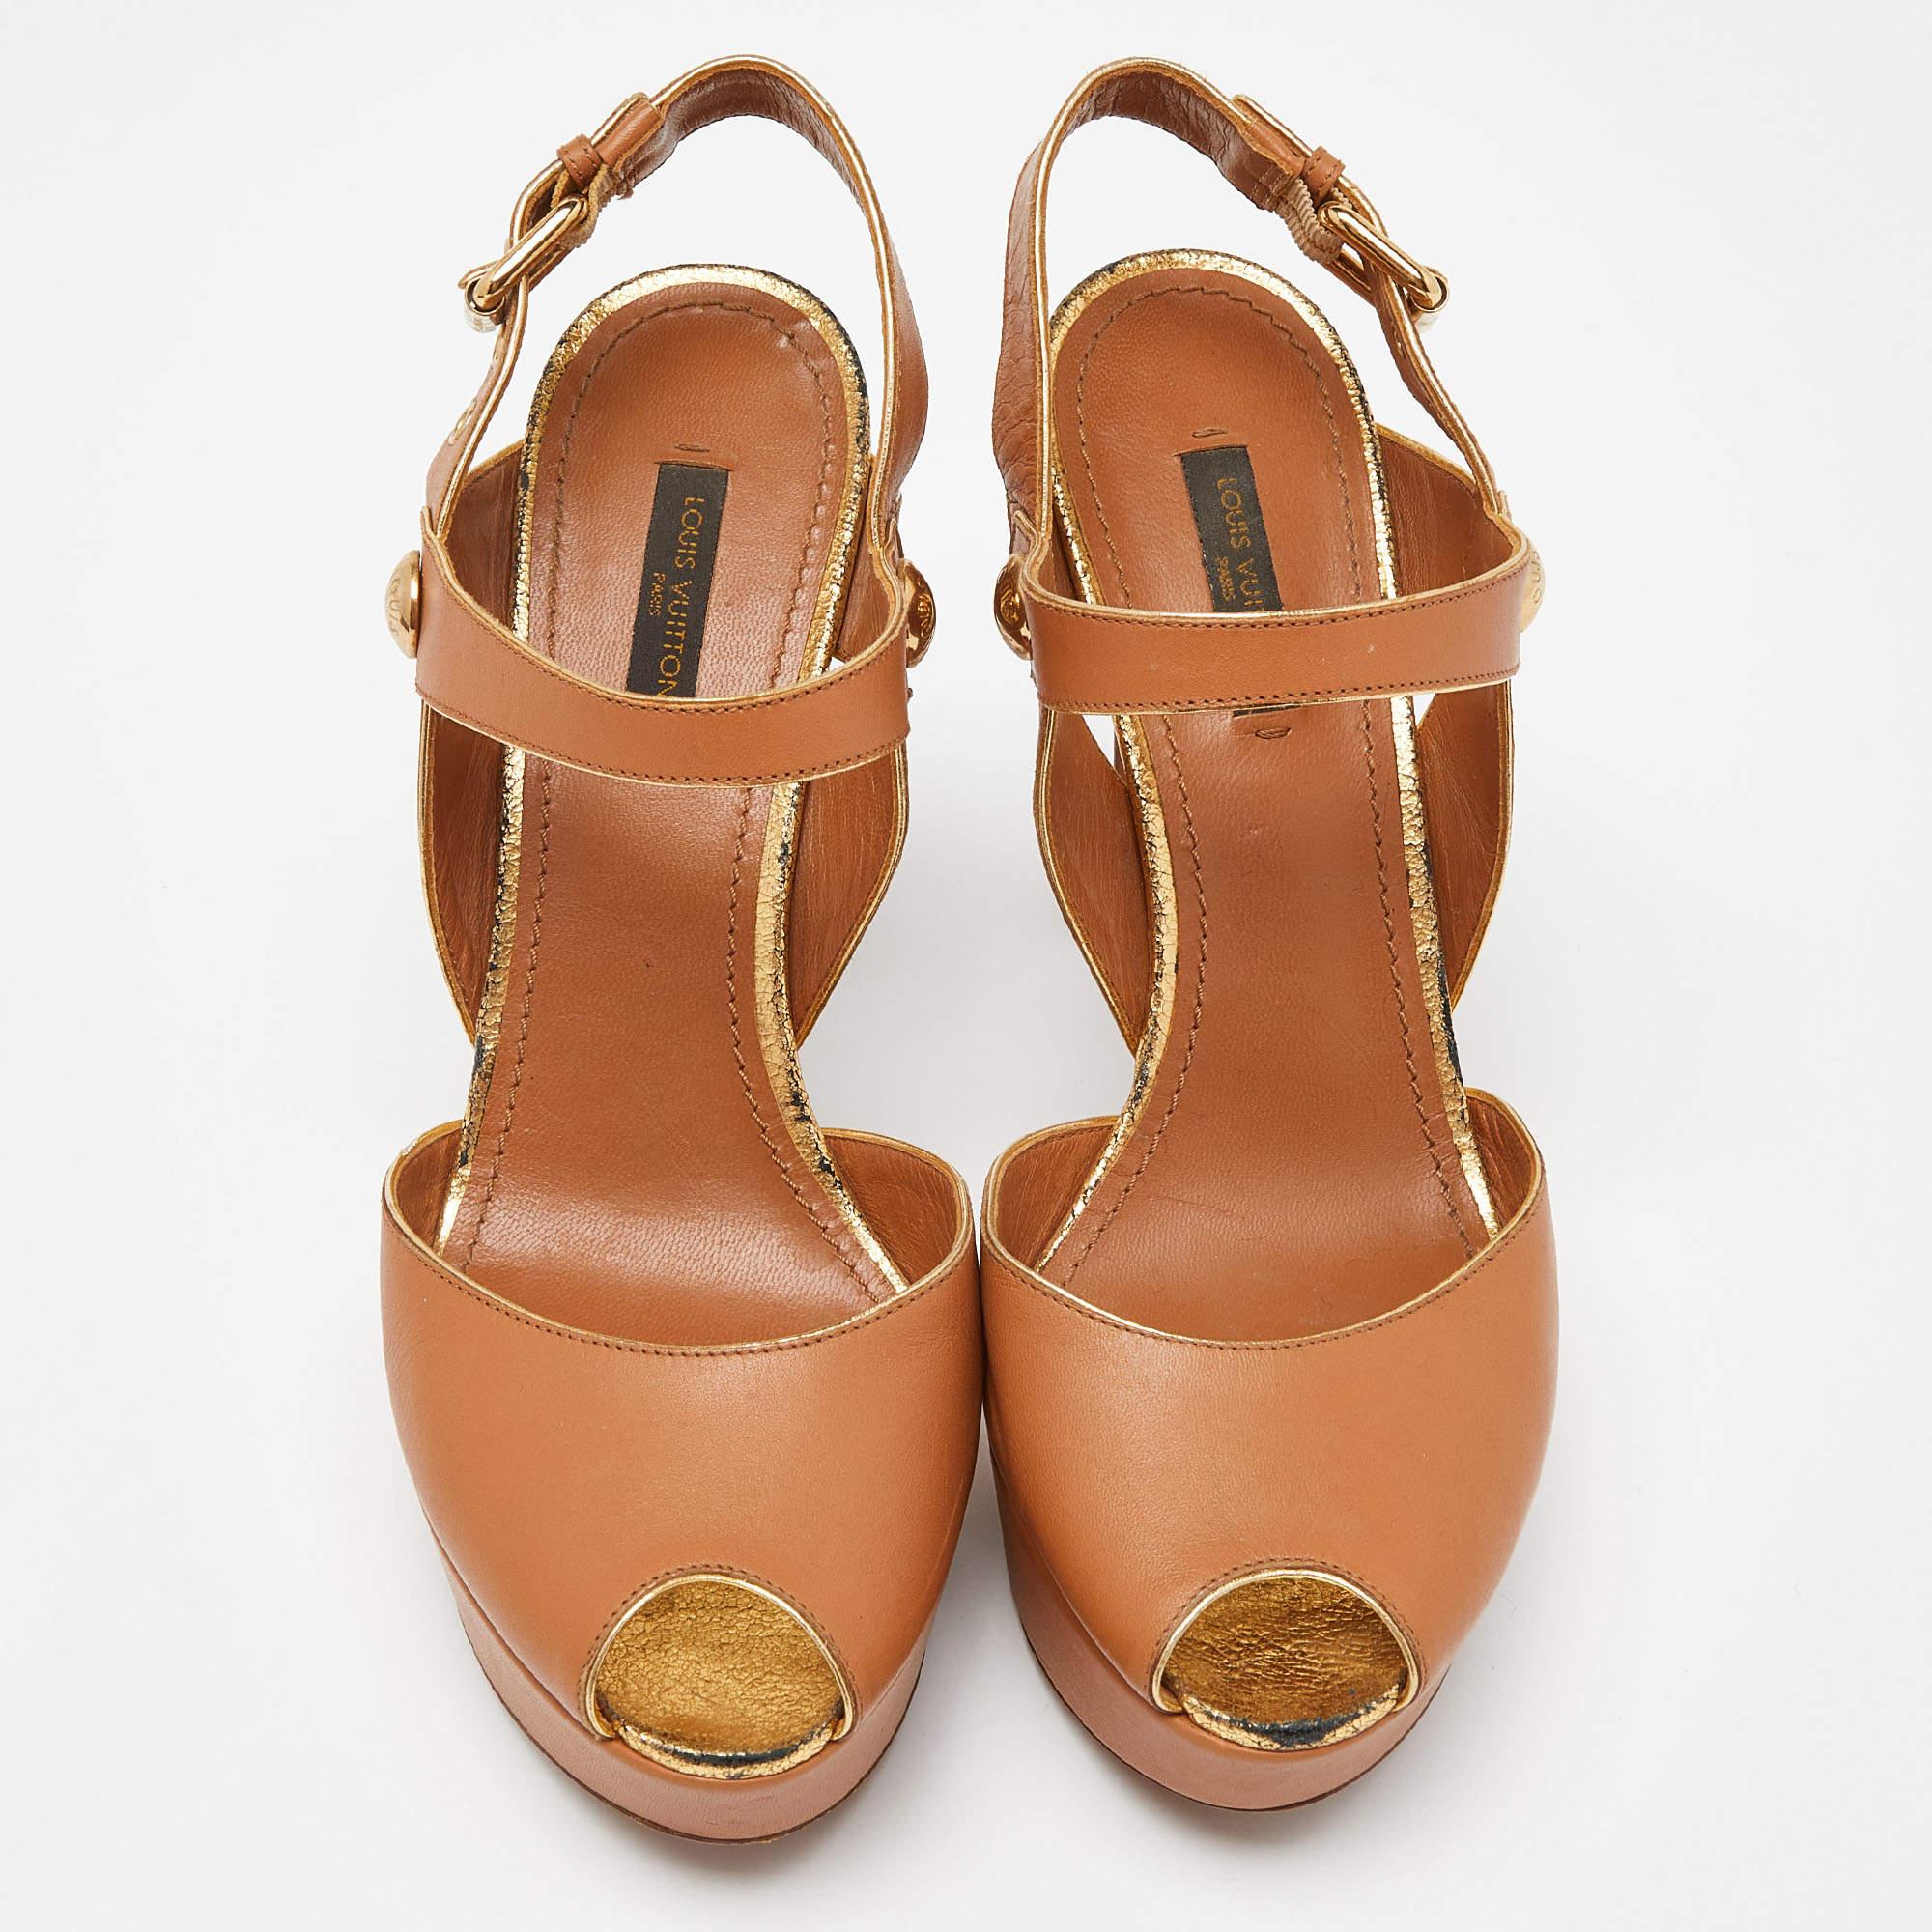 These Louis Vuitton sandals are crafted from leather in a brown shade that can go with many of your outfits. The 13cm heels and platforms will provide your feet with comfort all day long at work.

